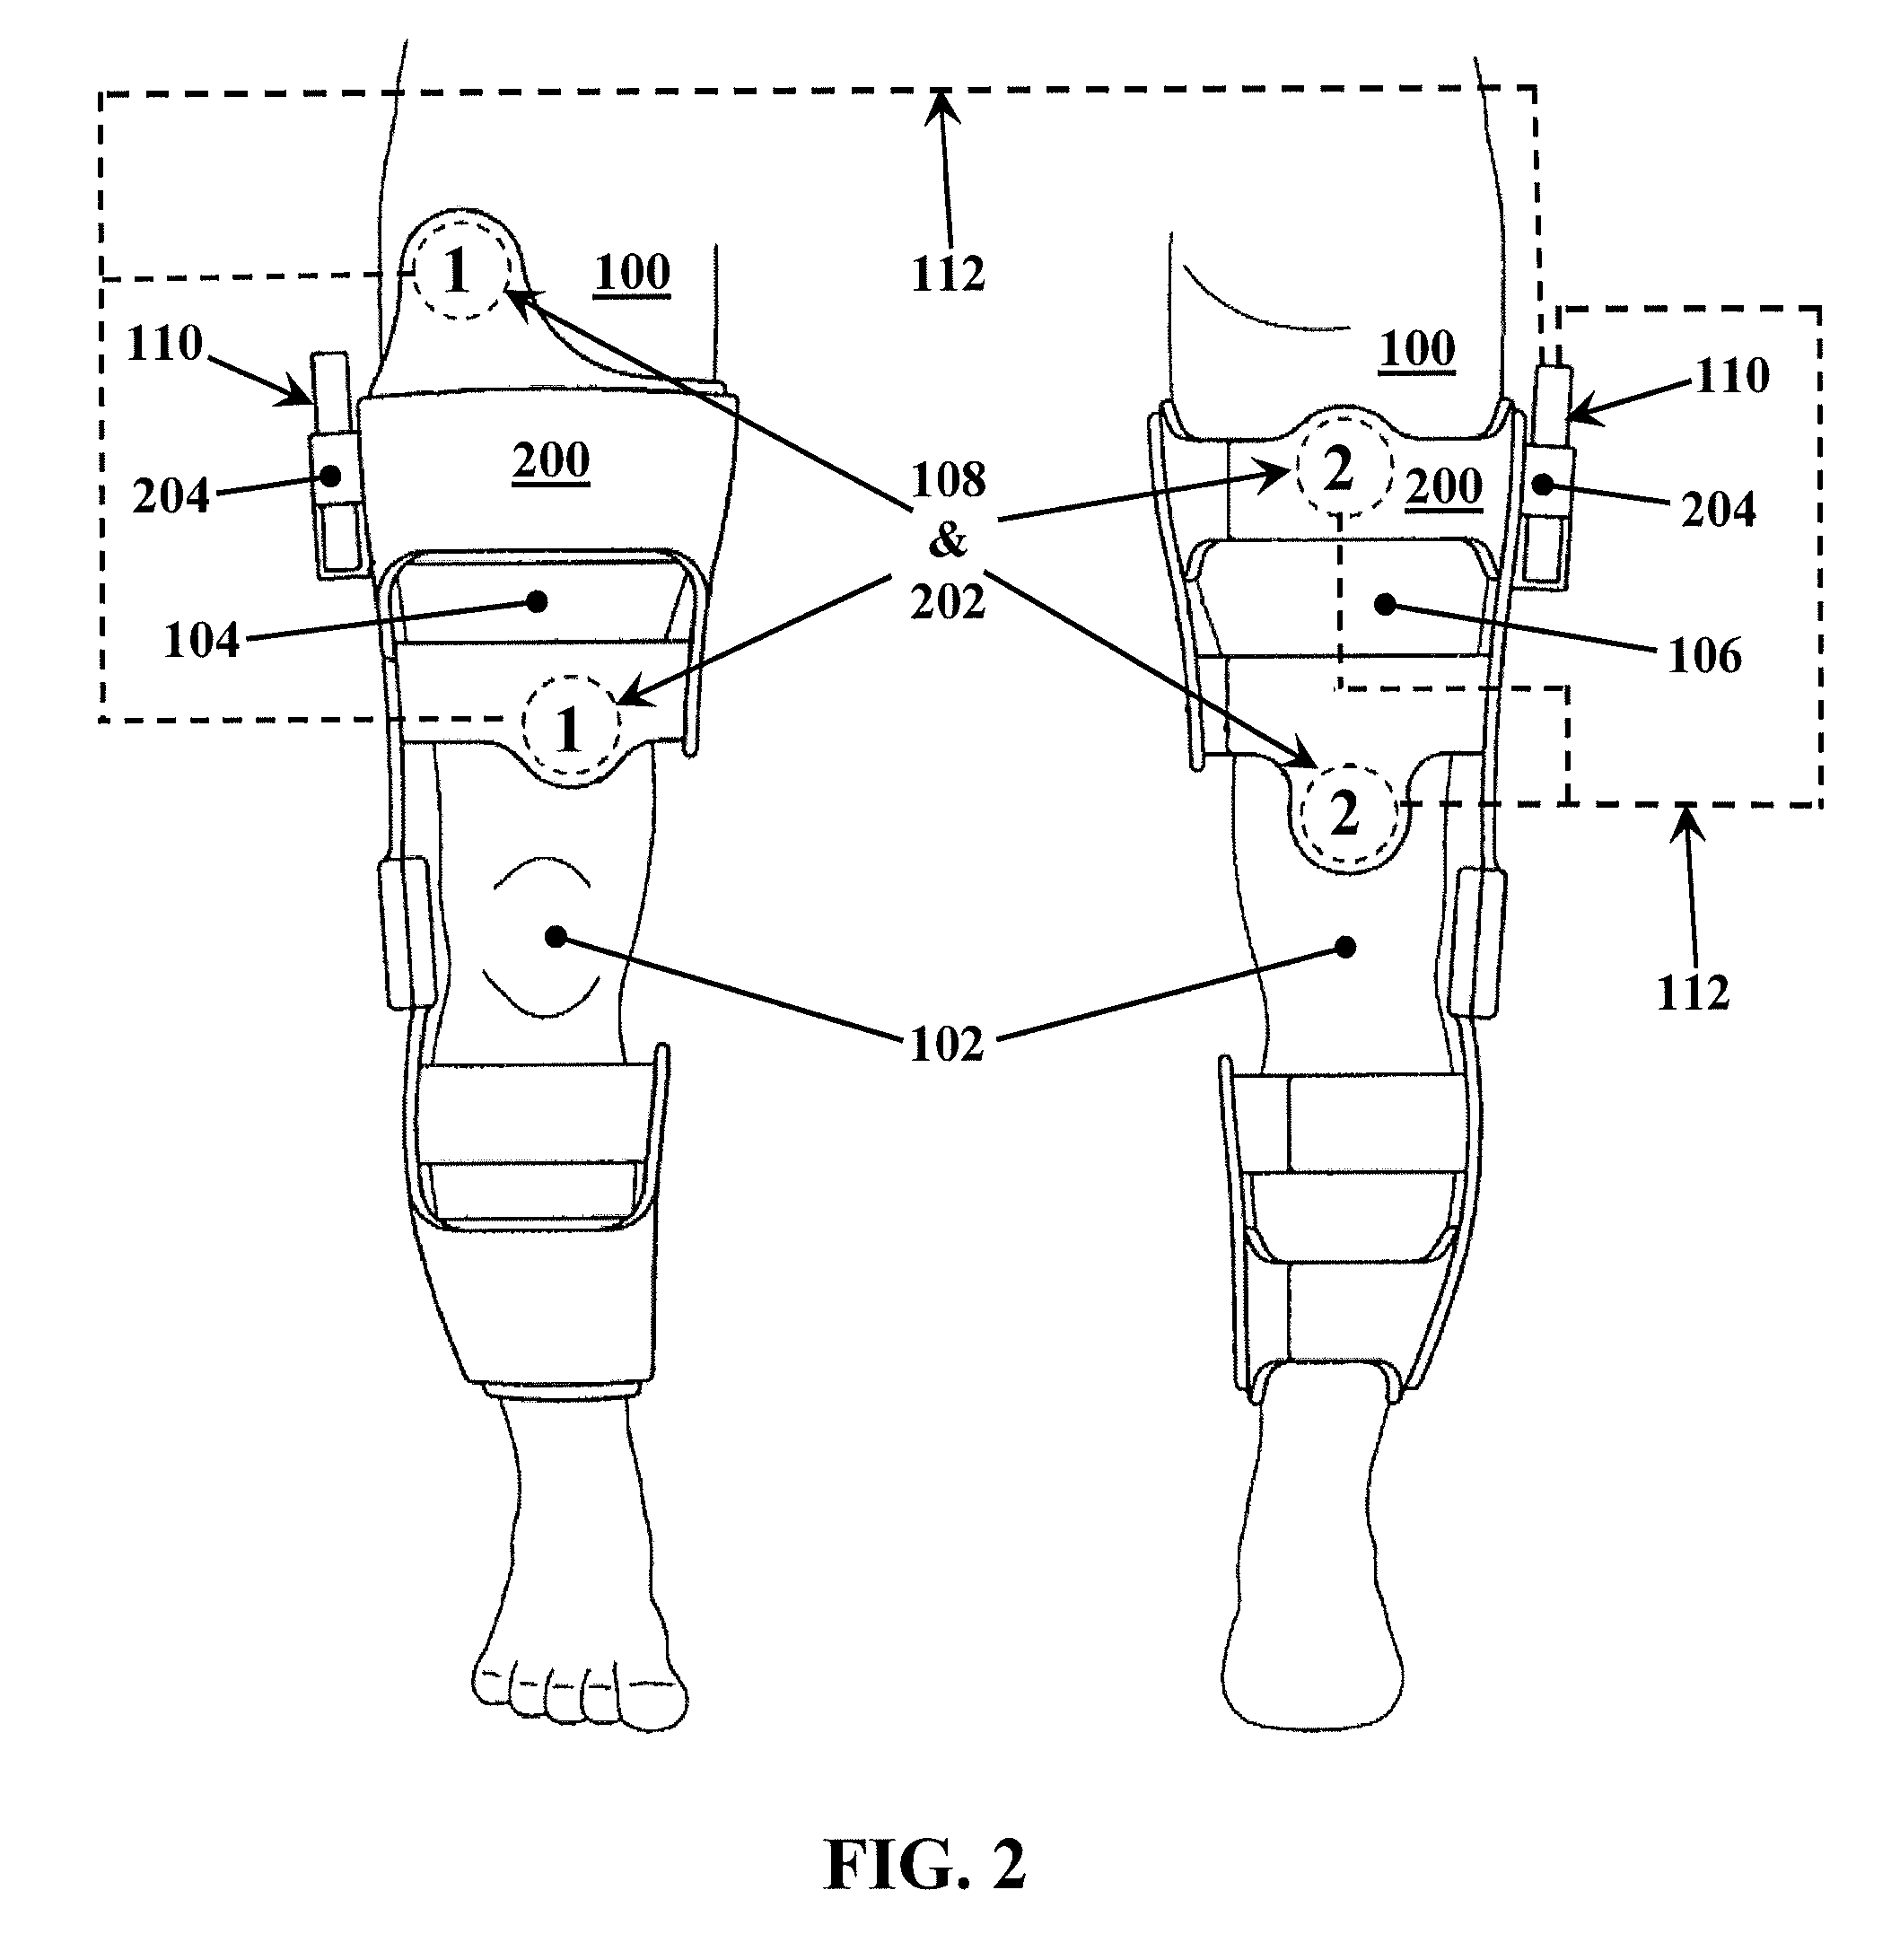 Apparatus and method for stabilizing, improving mobility, and controlling cartilage matrix degradation of weight-bearing articular joints